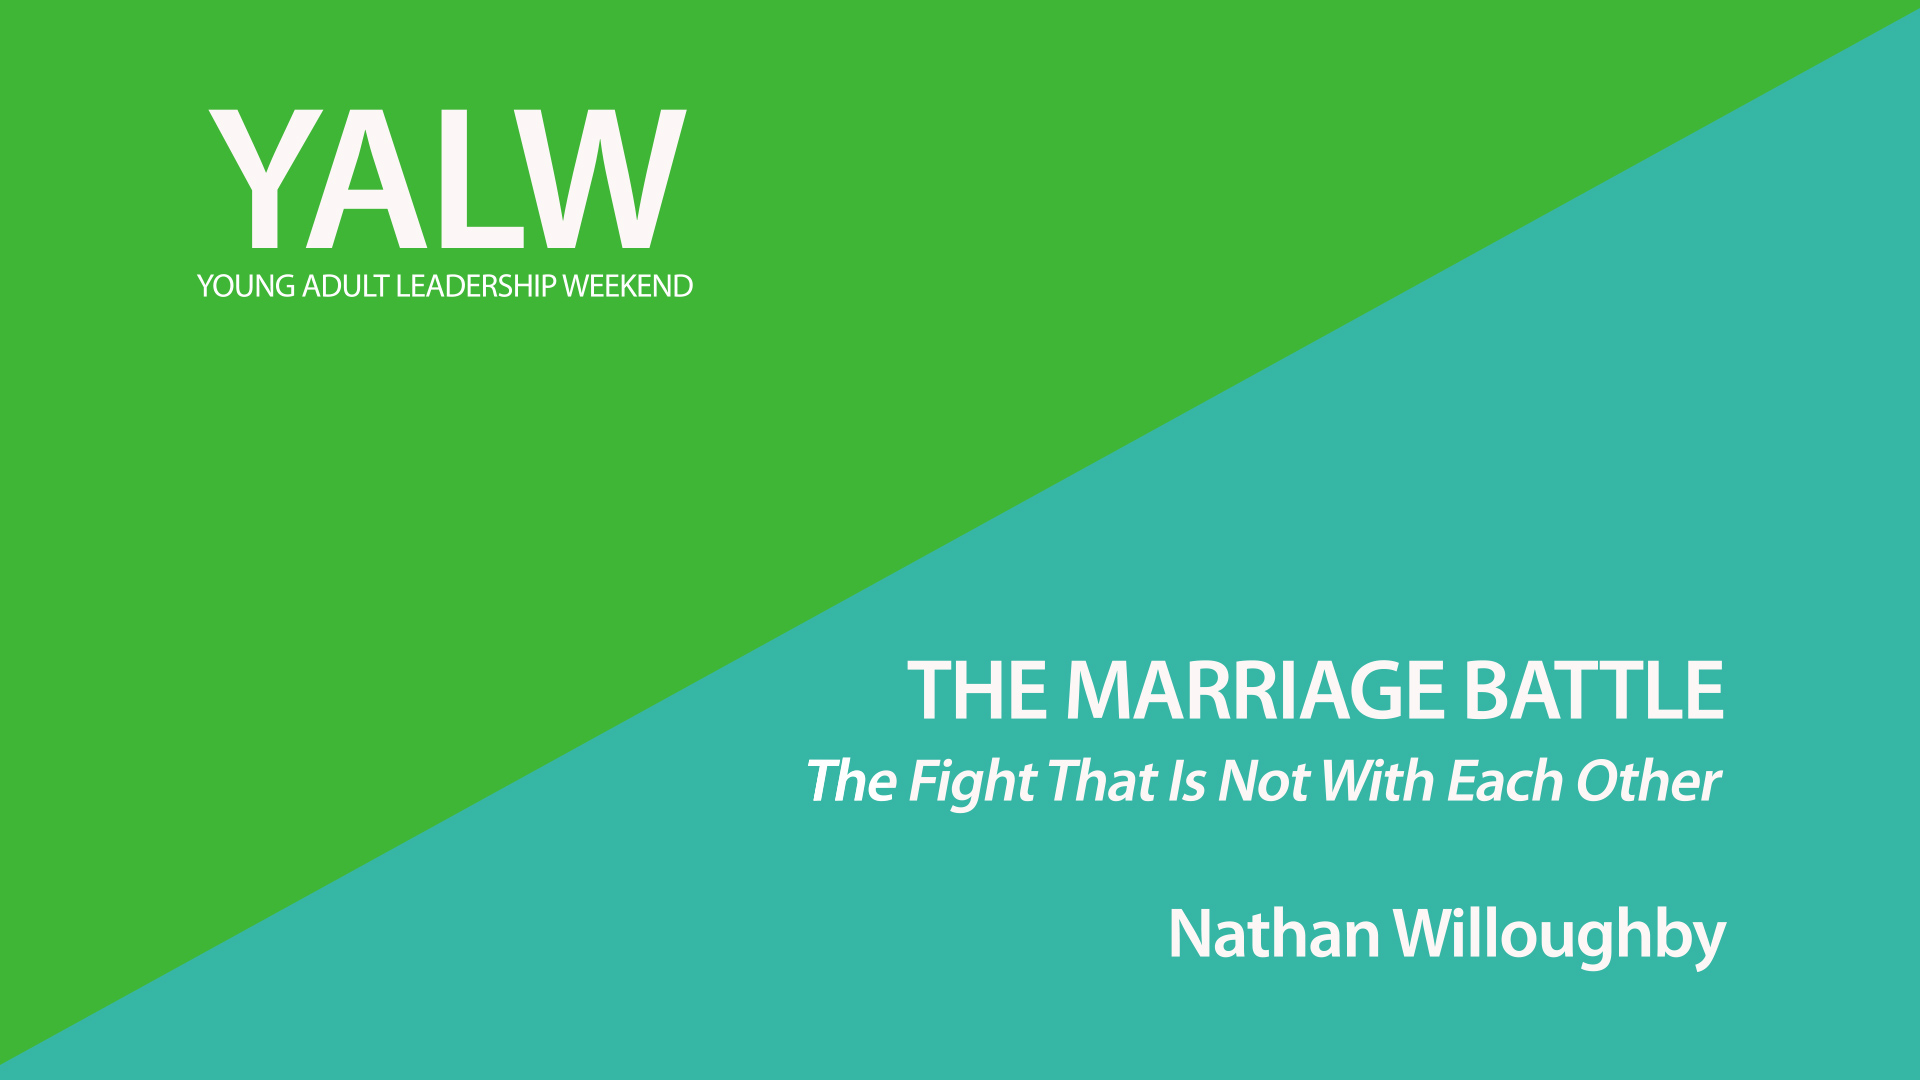 The Marriage Battle: The Fight That Is Not With Each Other